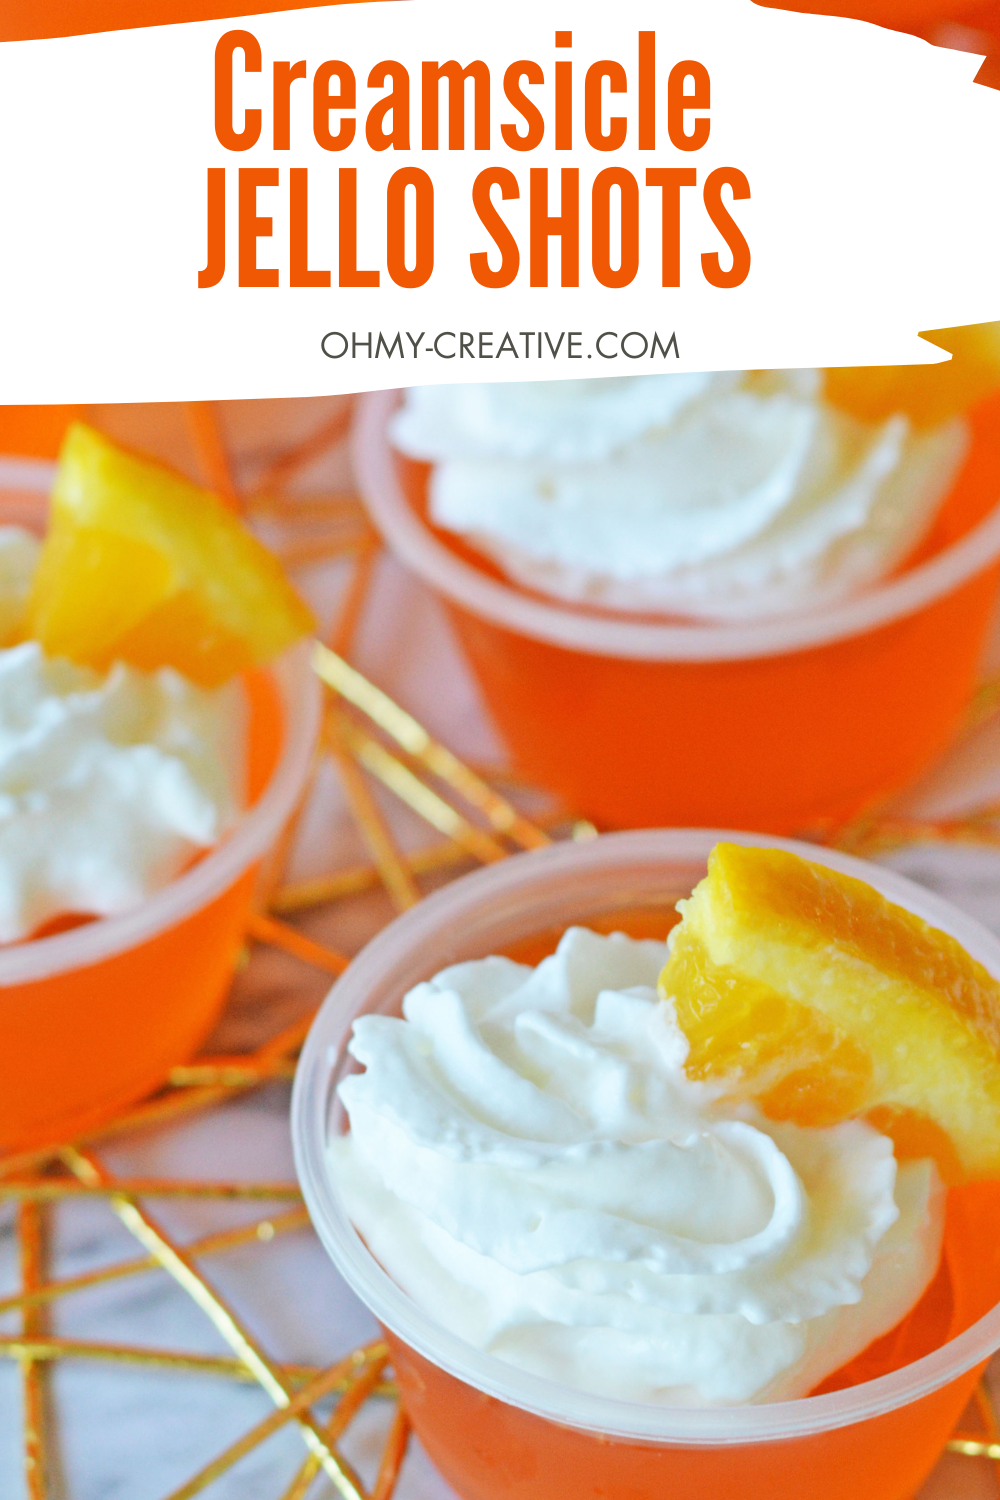  Pinterest image of creamsicle Jello shot with wiped cream and a slice of orange of for garnish.